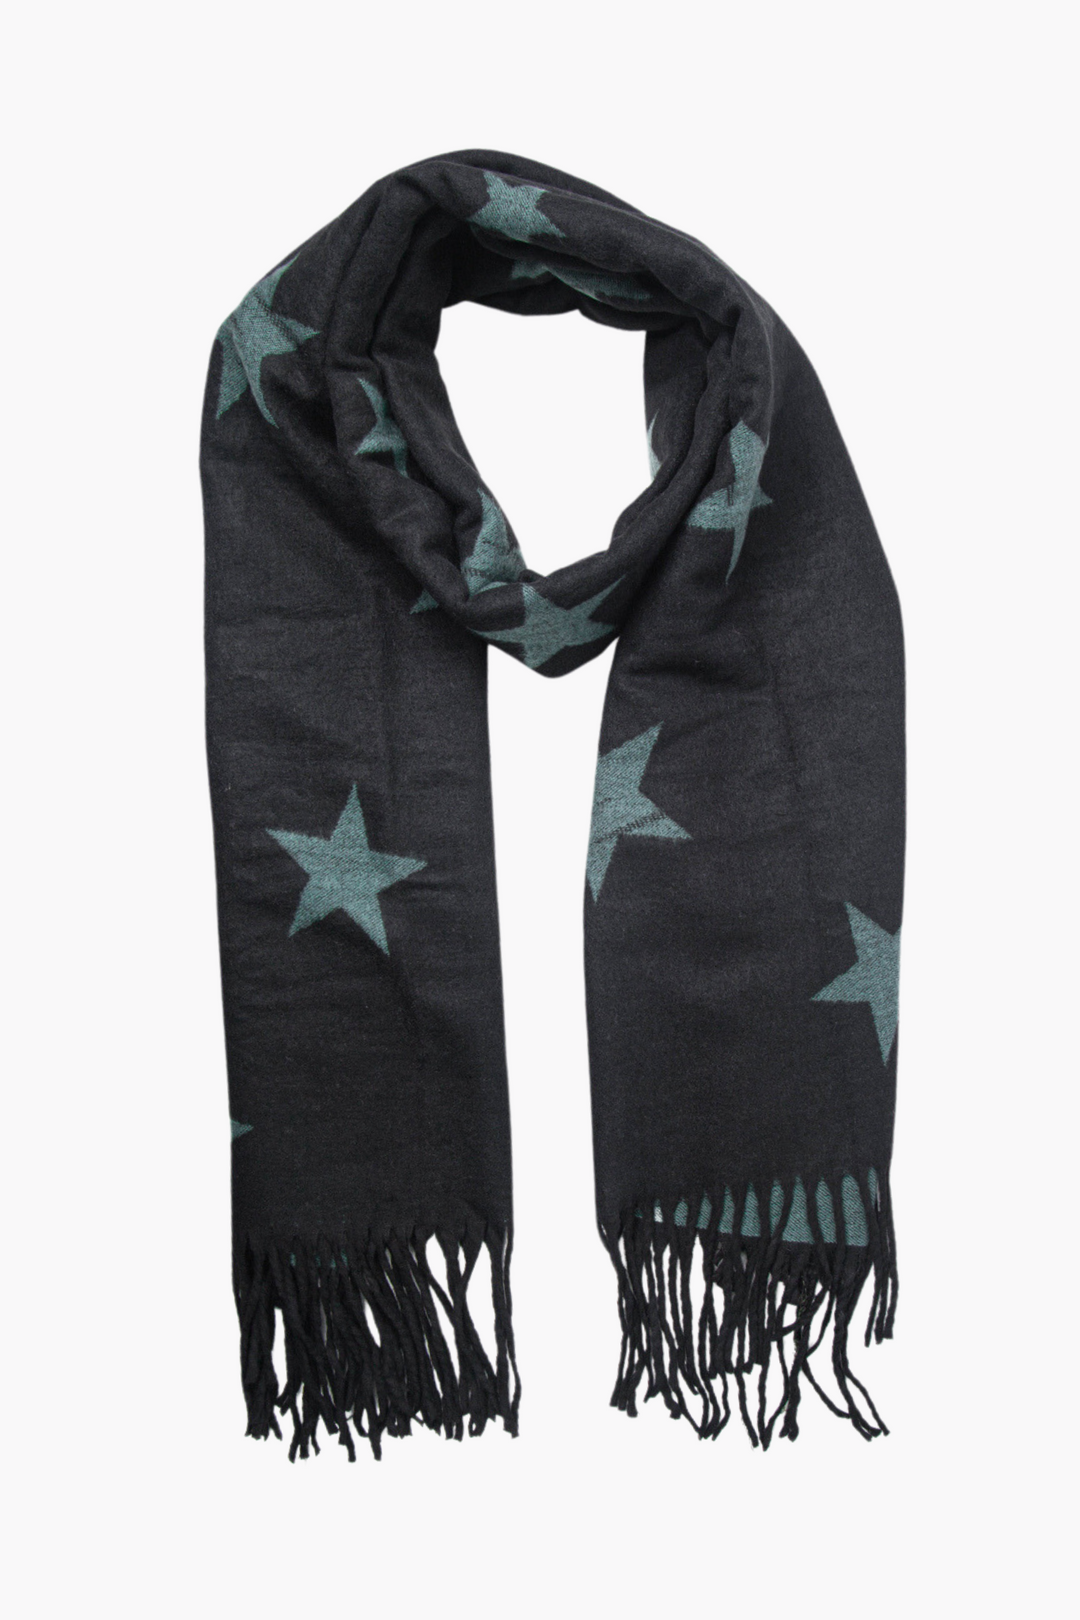 Black Green Heavyweight Scarf in Scattered Star Print